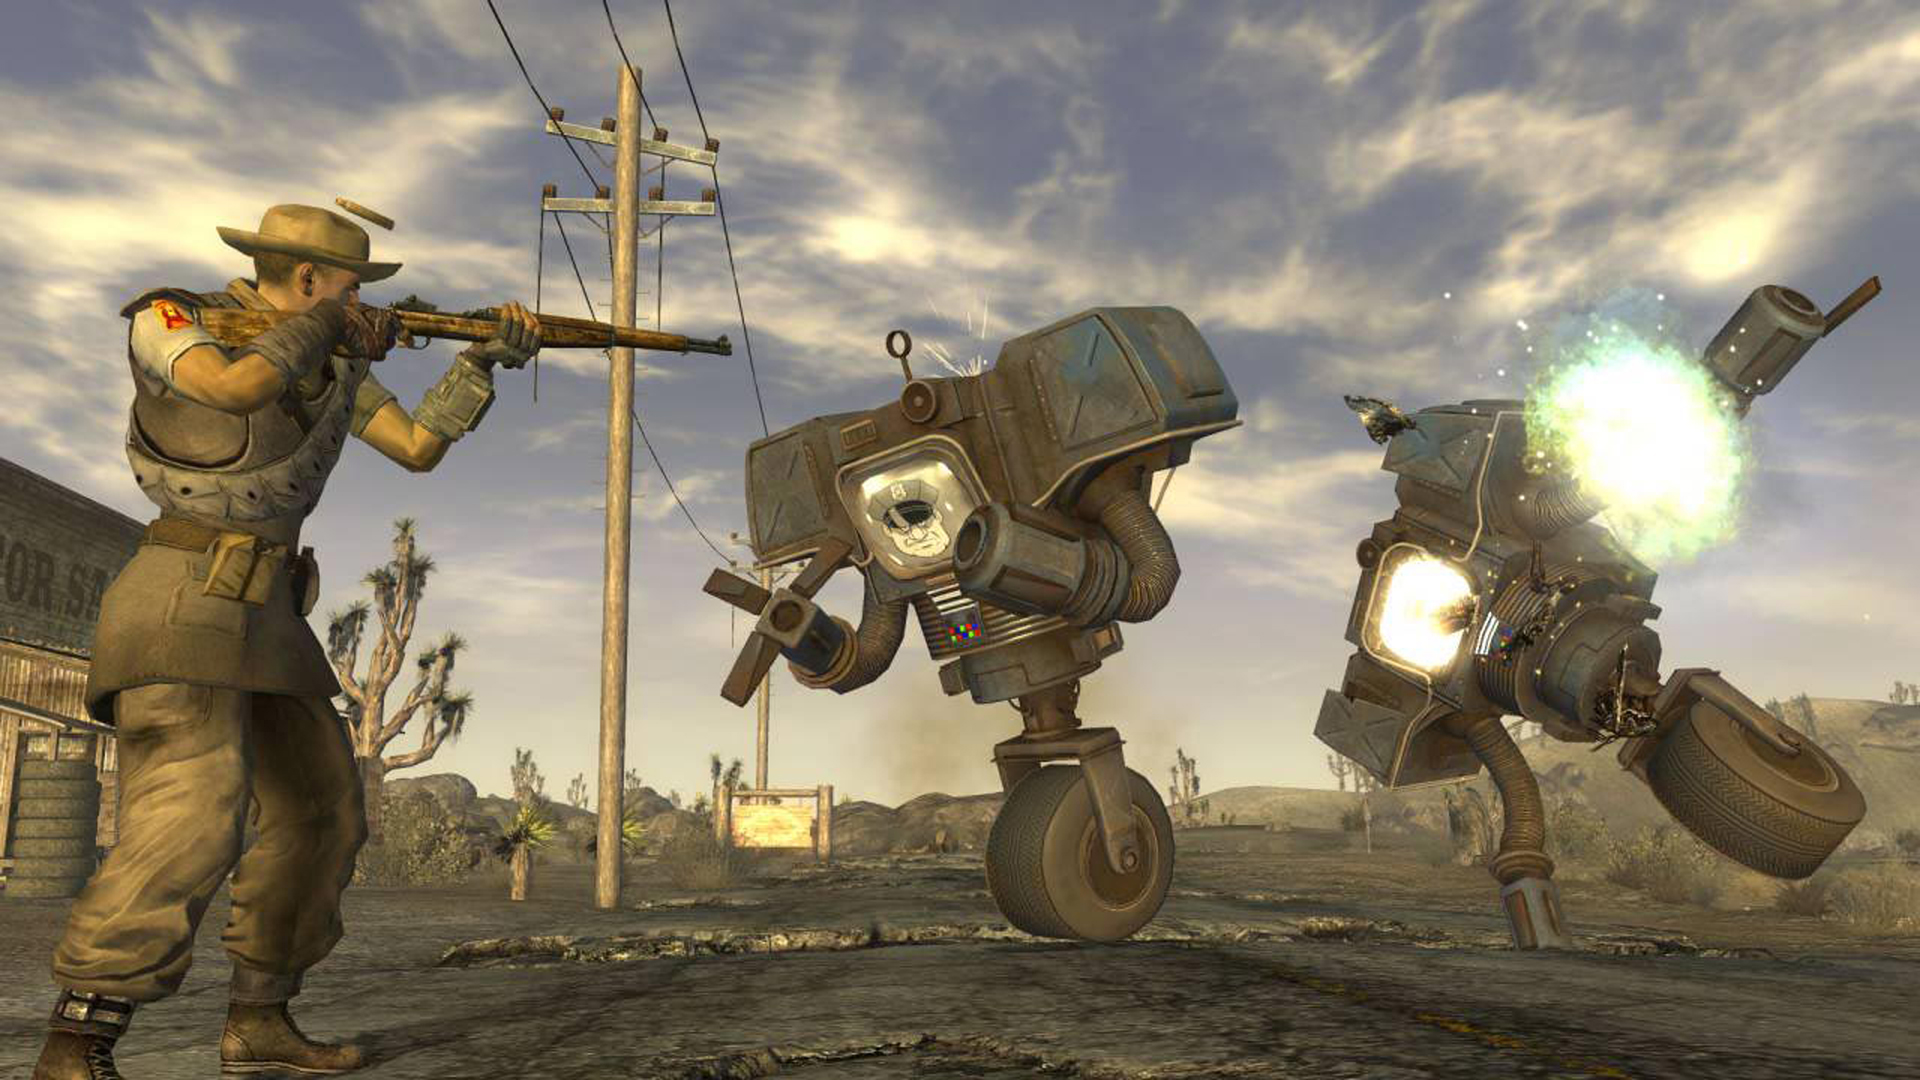 How to Get infinite caps and ammo in Fallout 3 for XBox 360 « Xbox